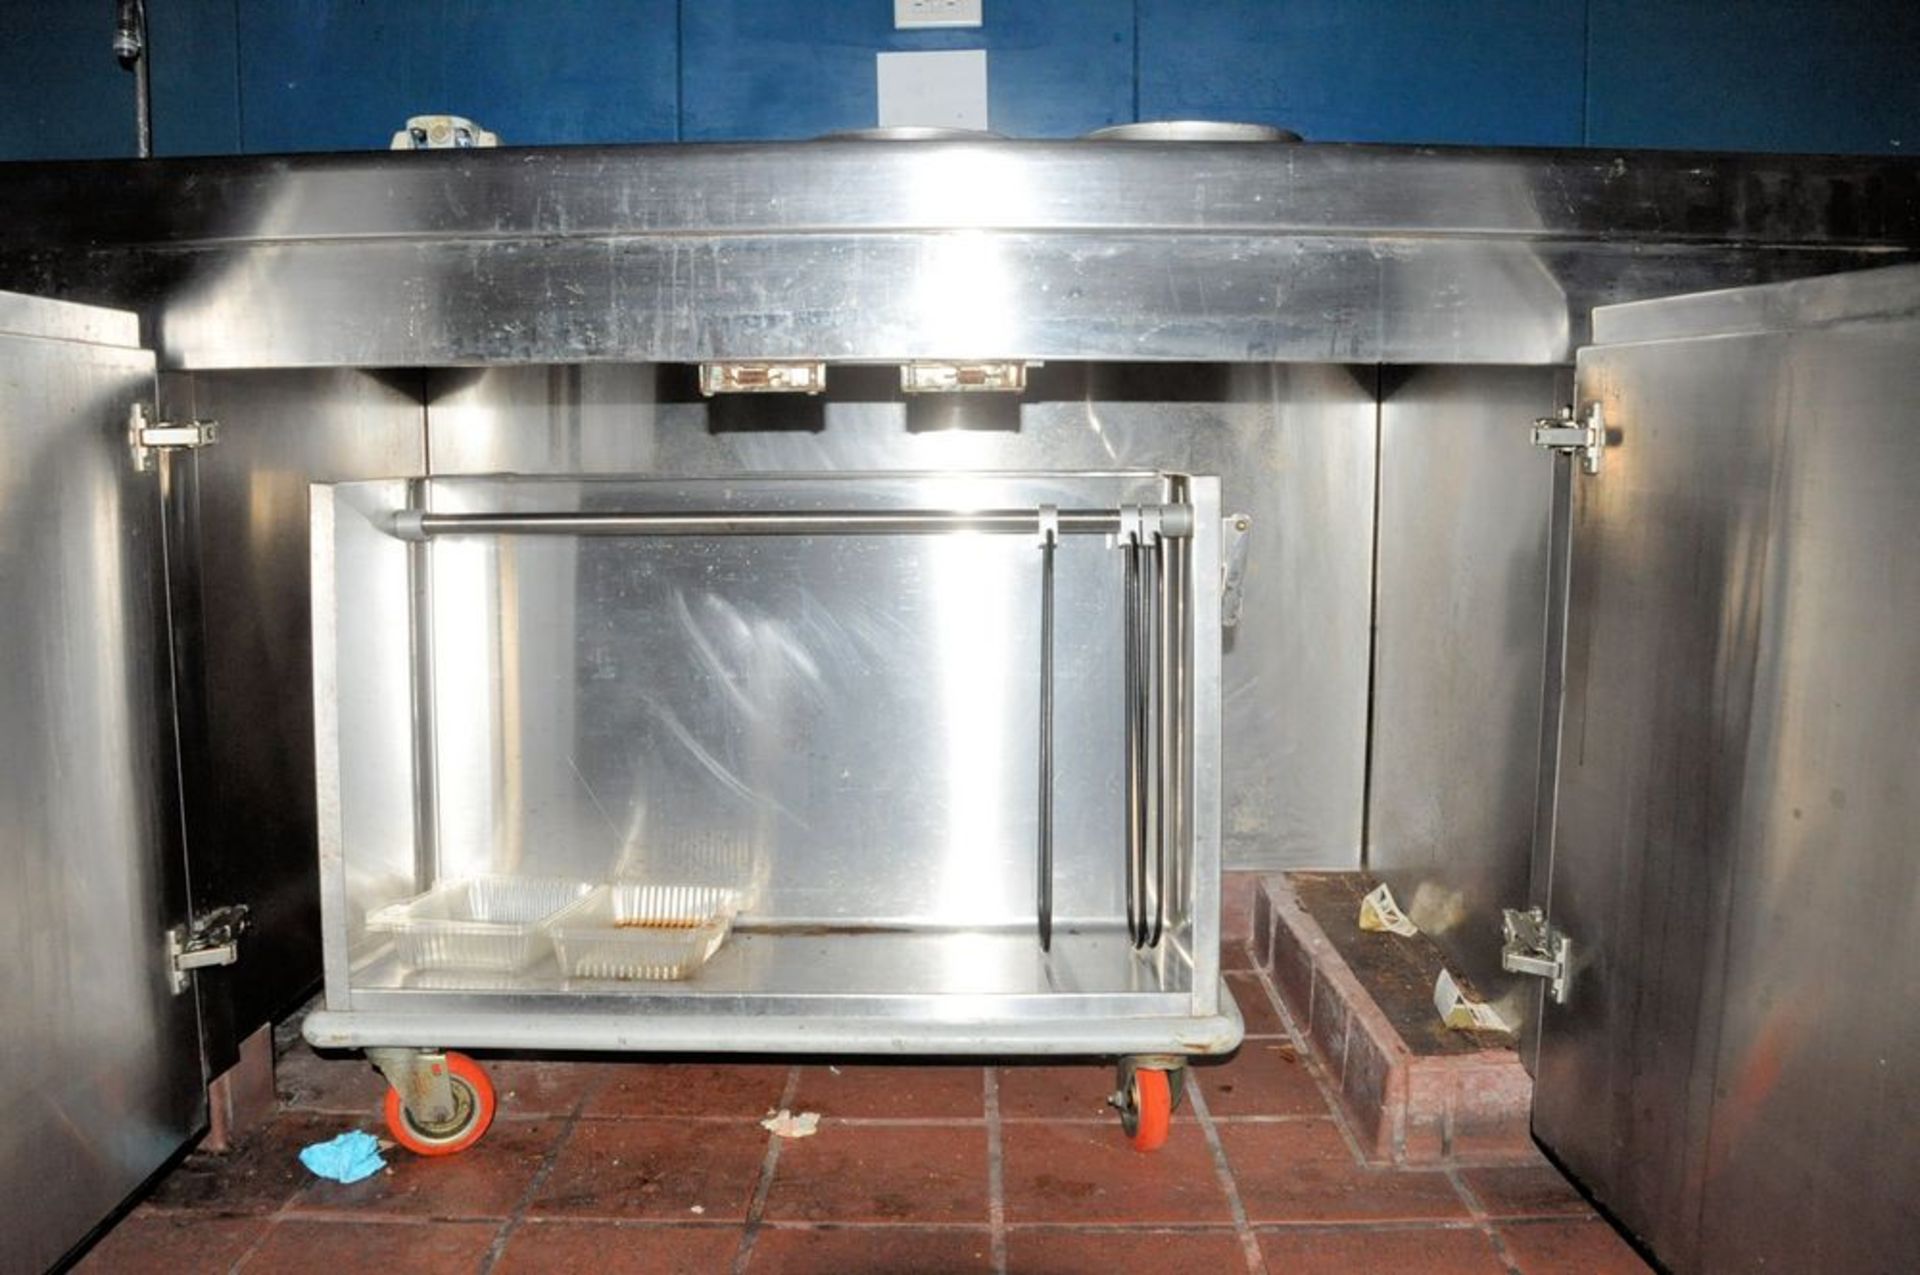 Stainless Steel Back Counter with Under Counter Enclosed Storage, 32" x 14' 6", (Main Kitchen Area), - Image 6 of 7